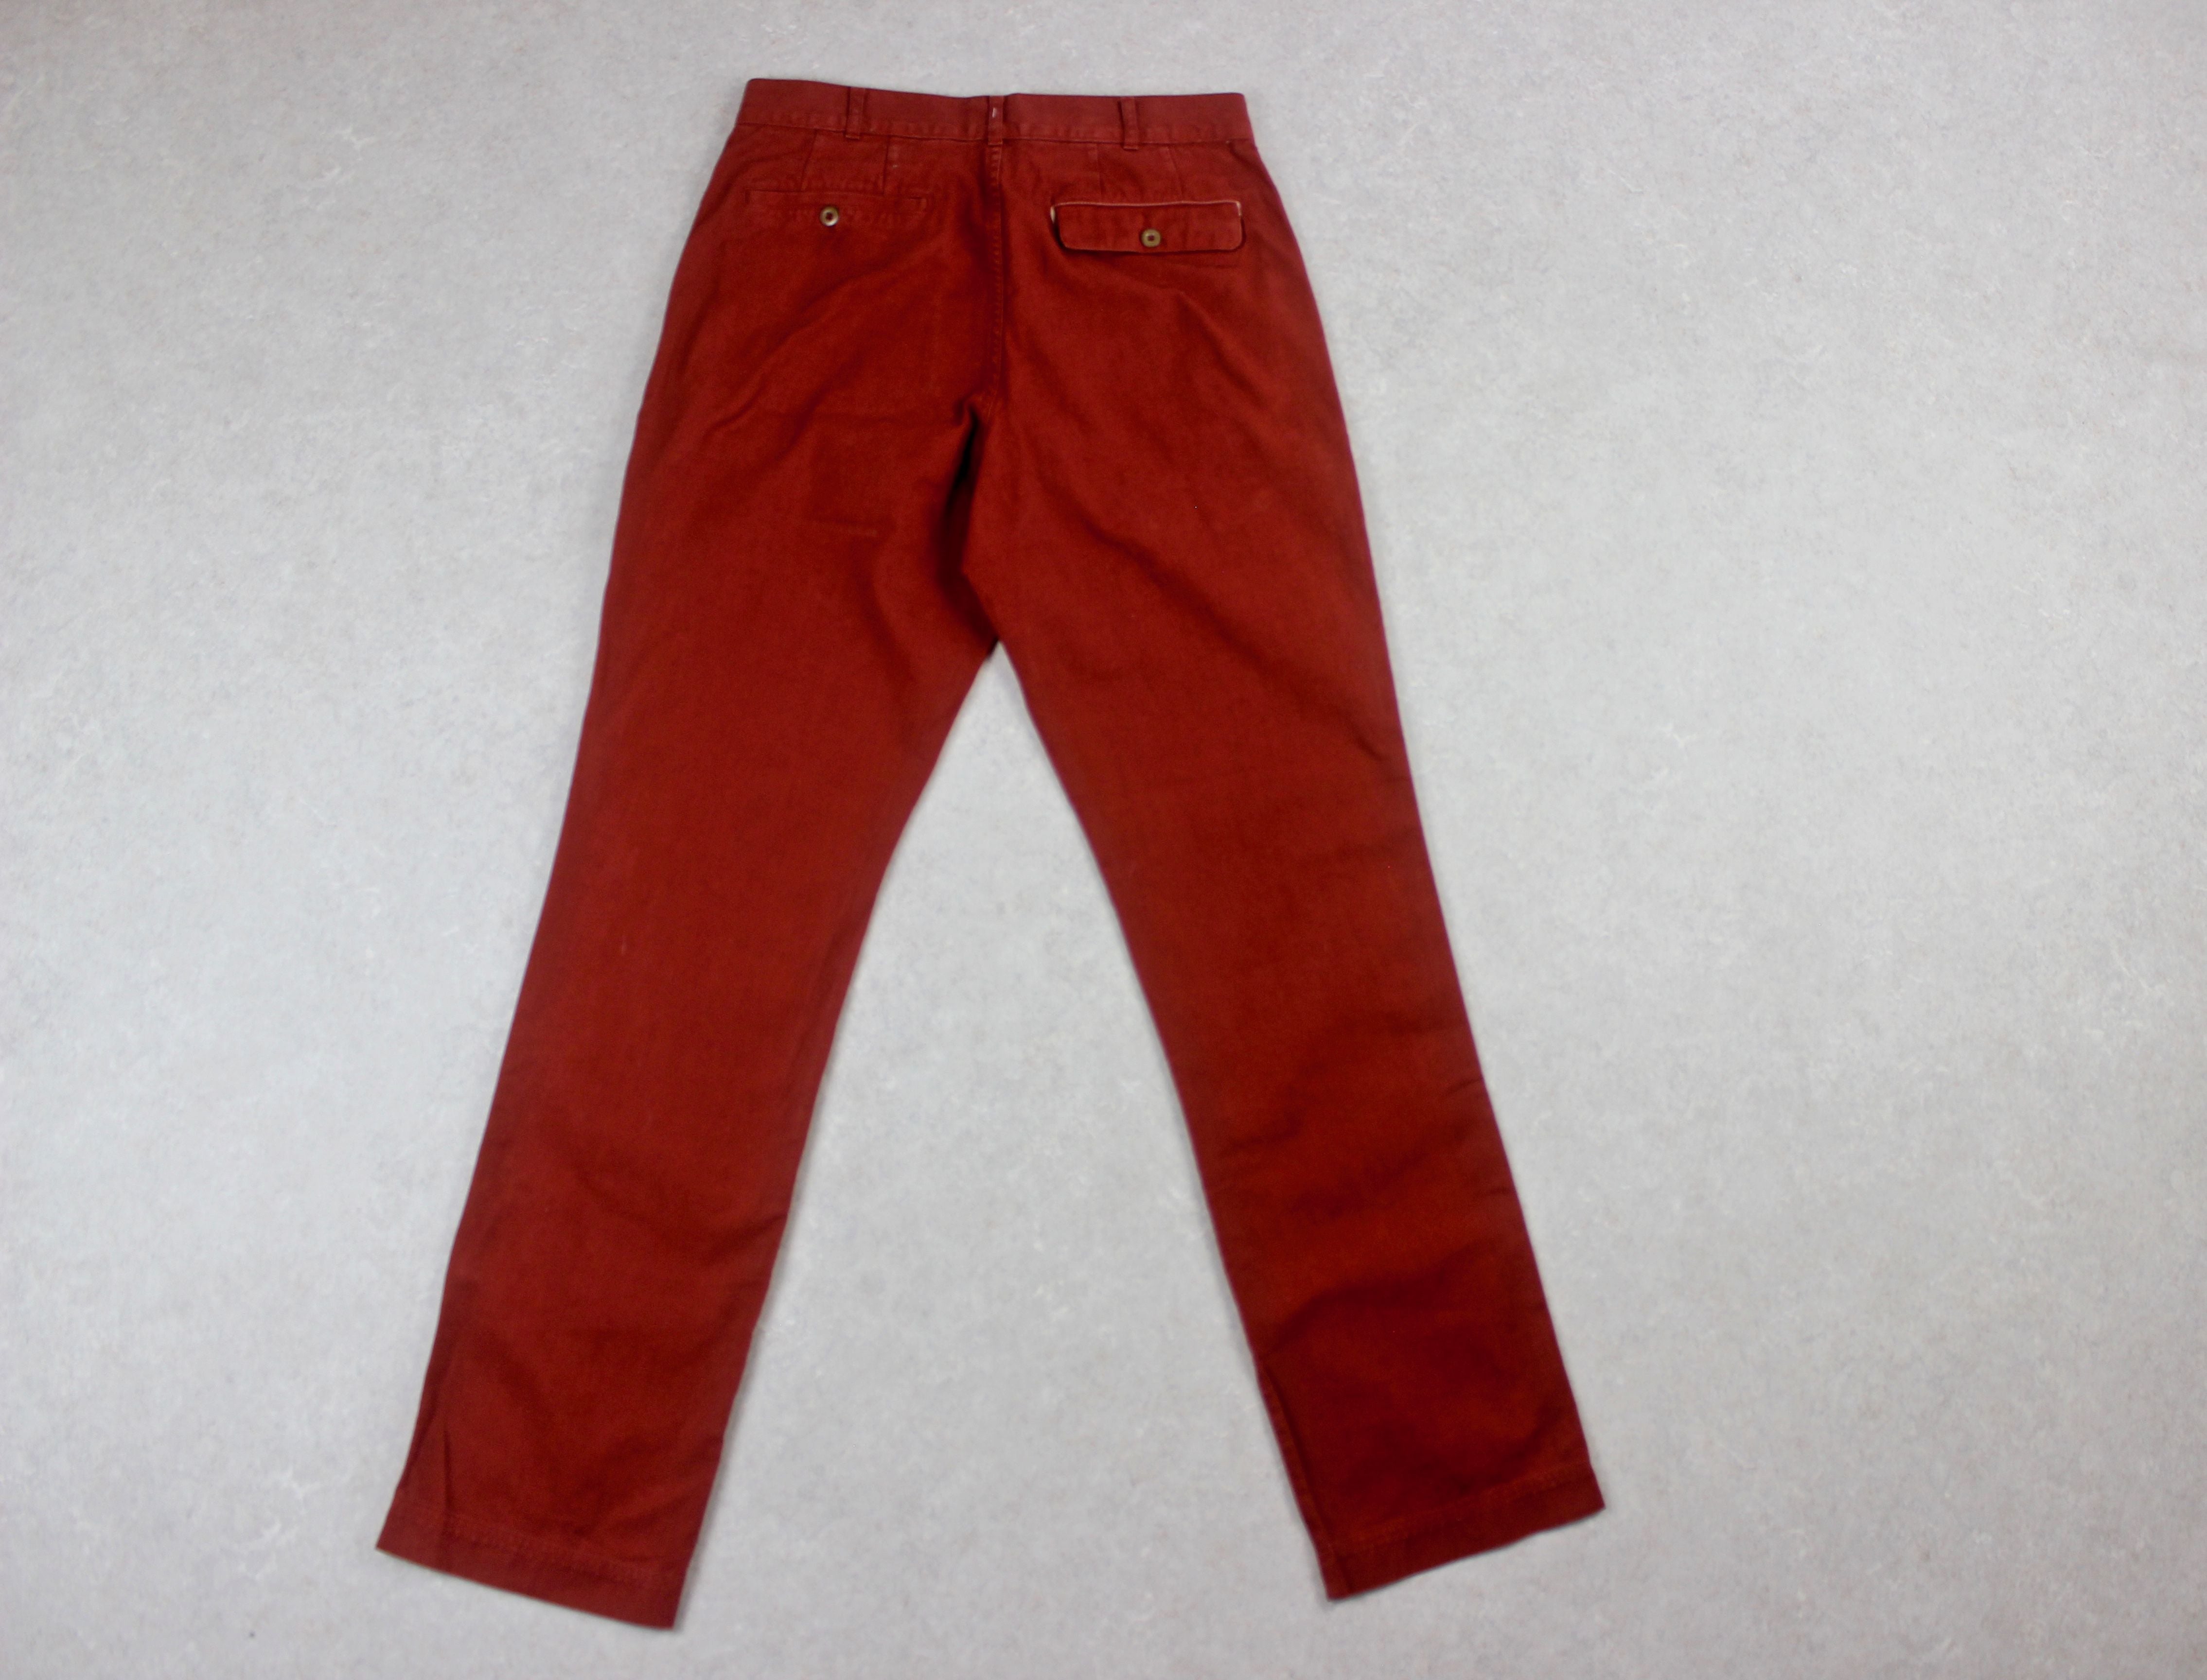 MHL Margaret Howell - Fatigue Trousers - Red - Small